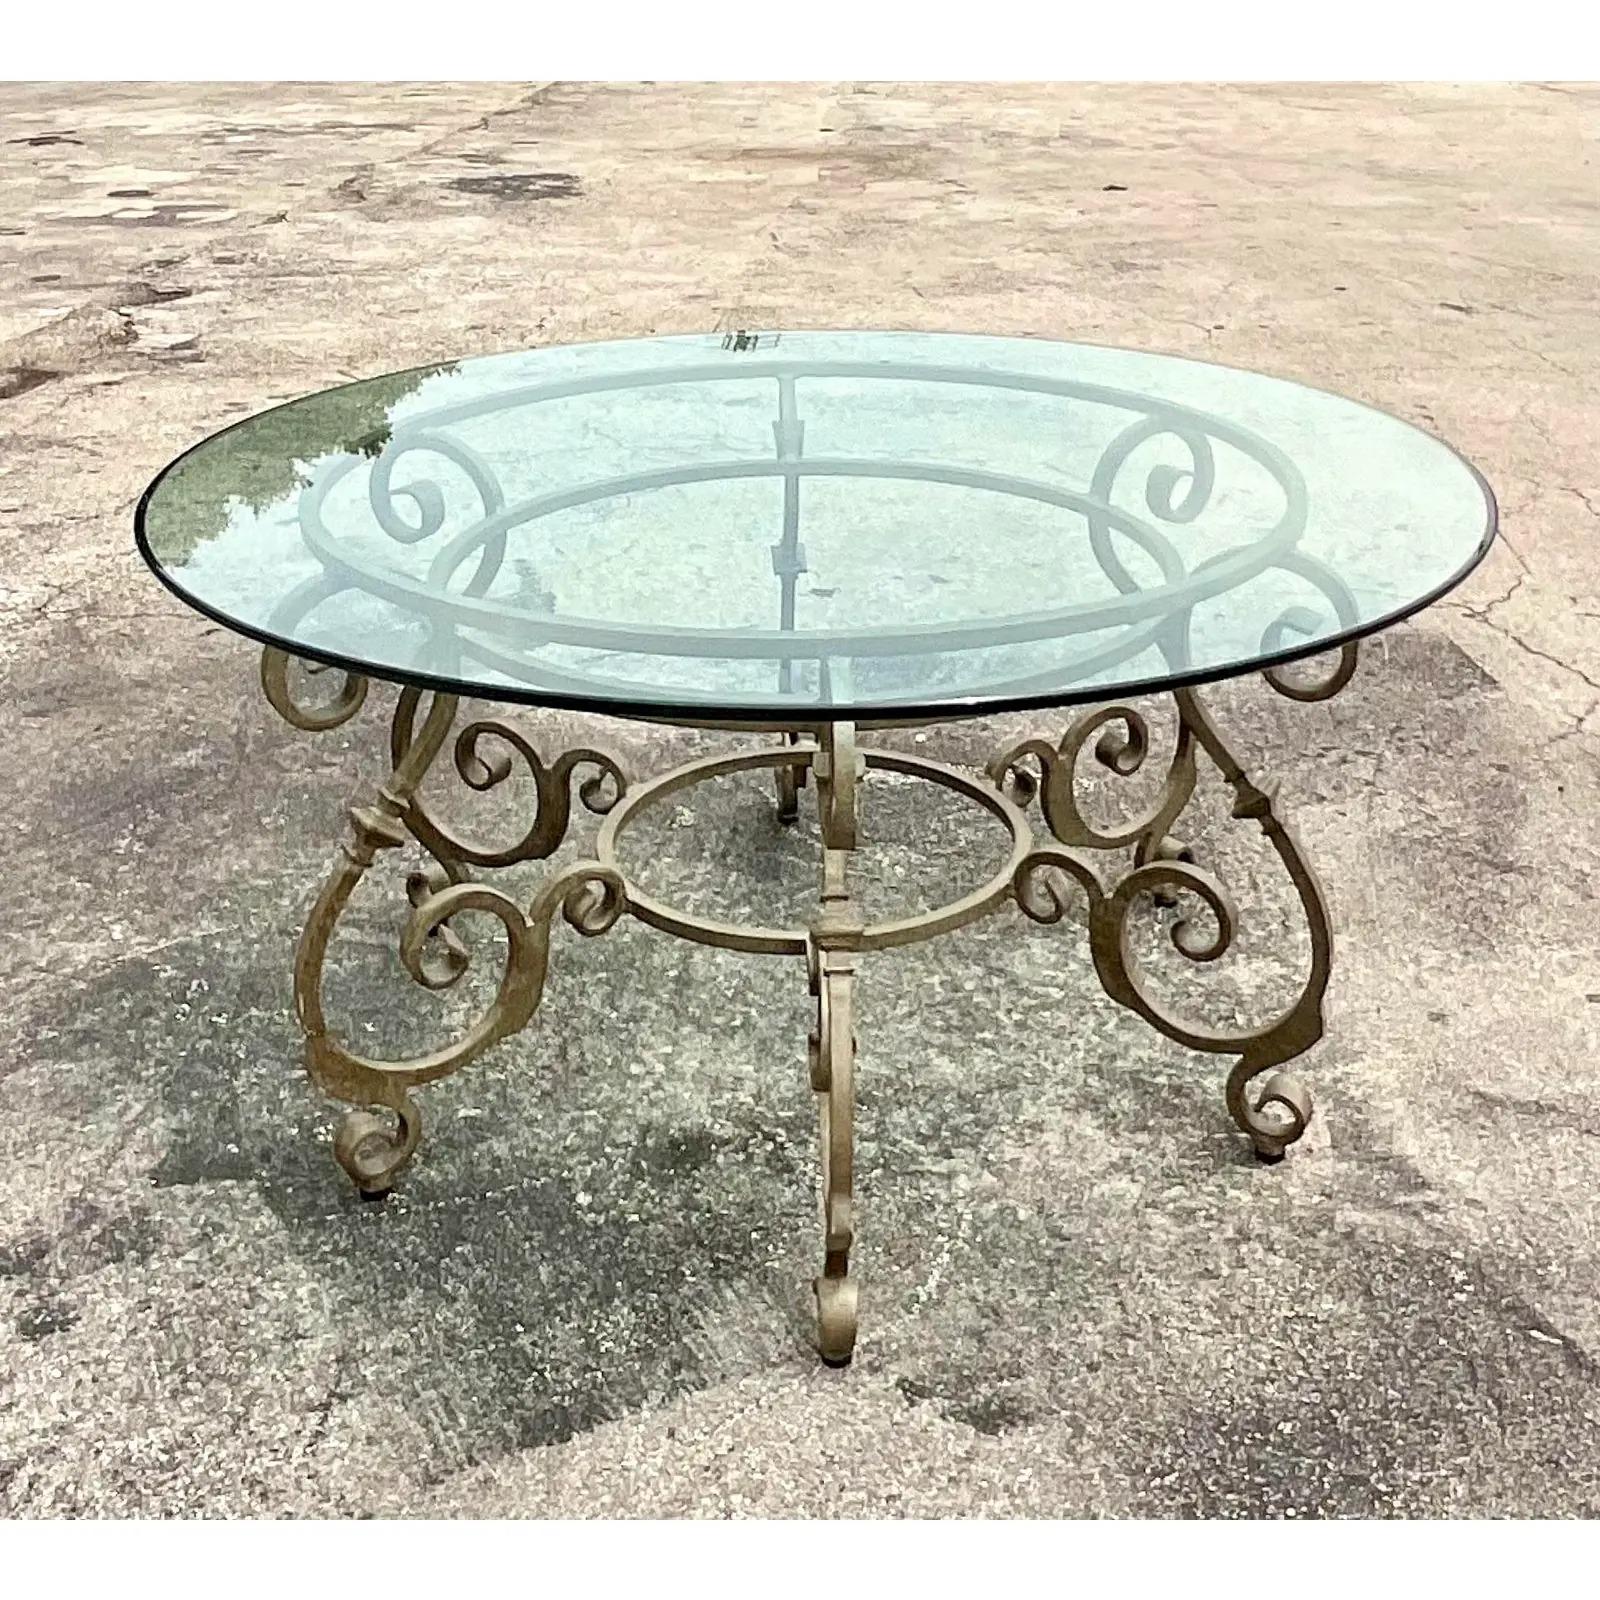 North American Vintage Wrought Iron Dining Table